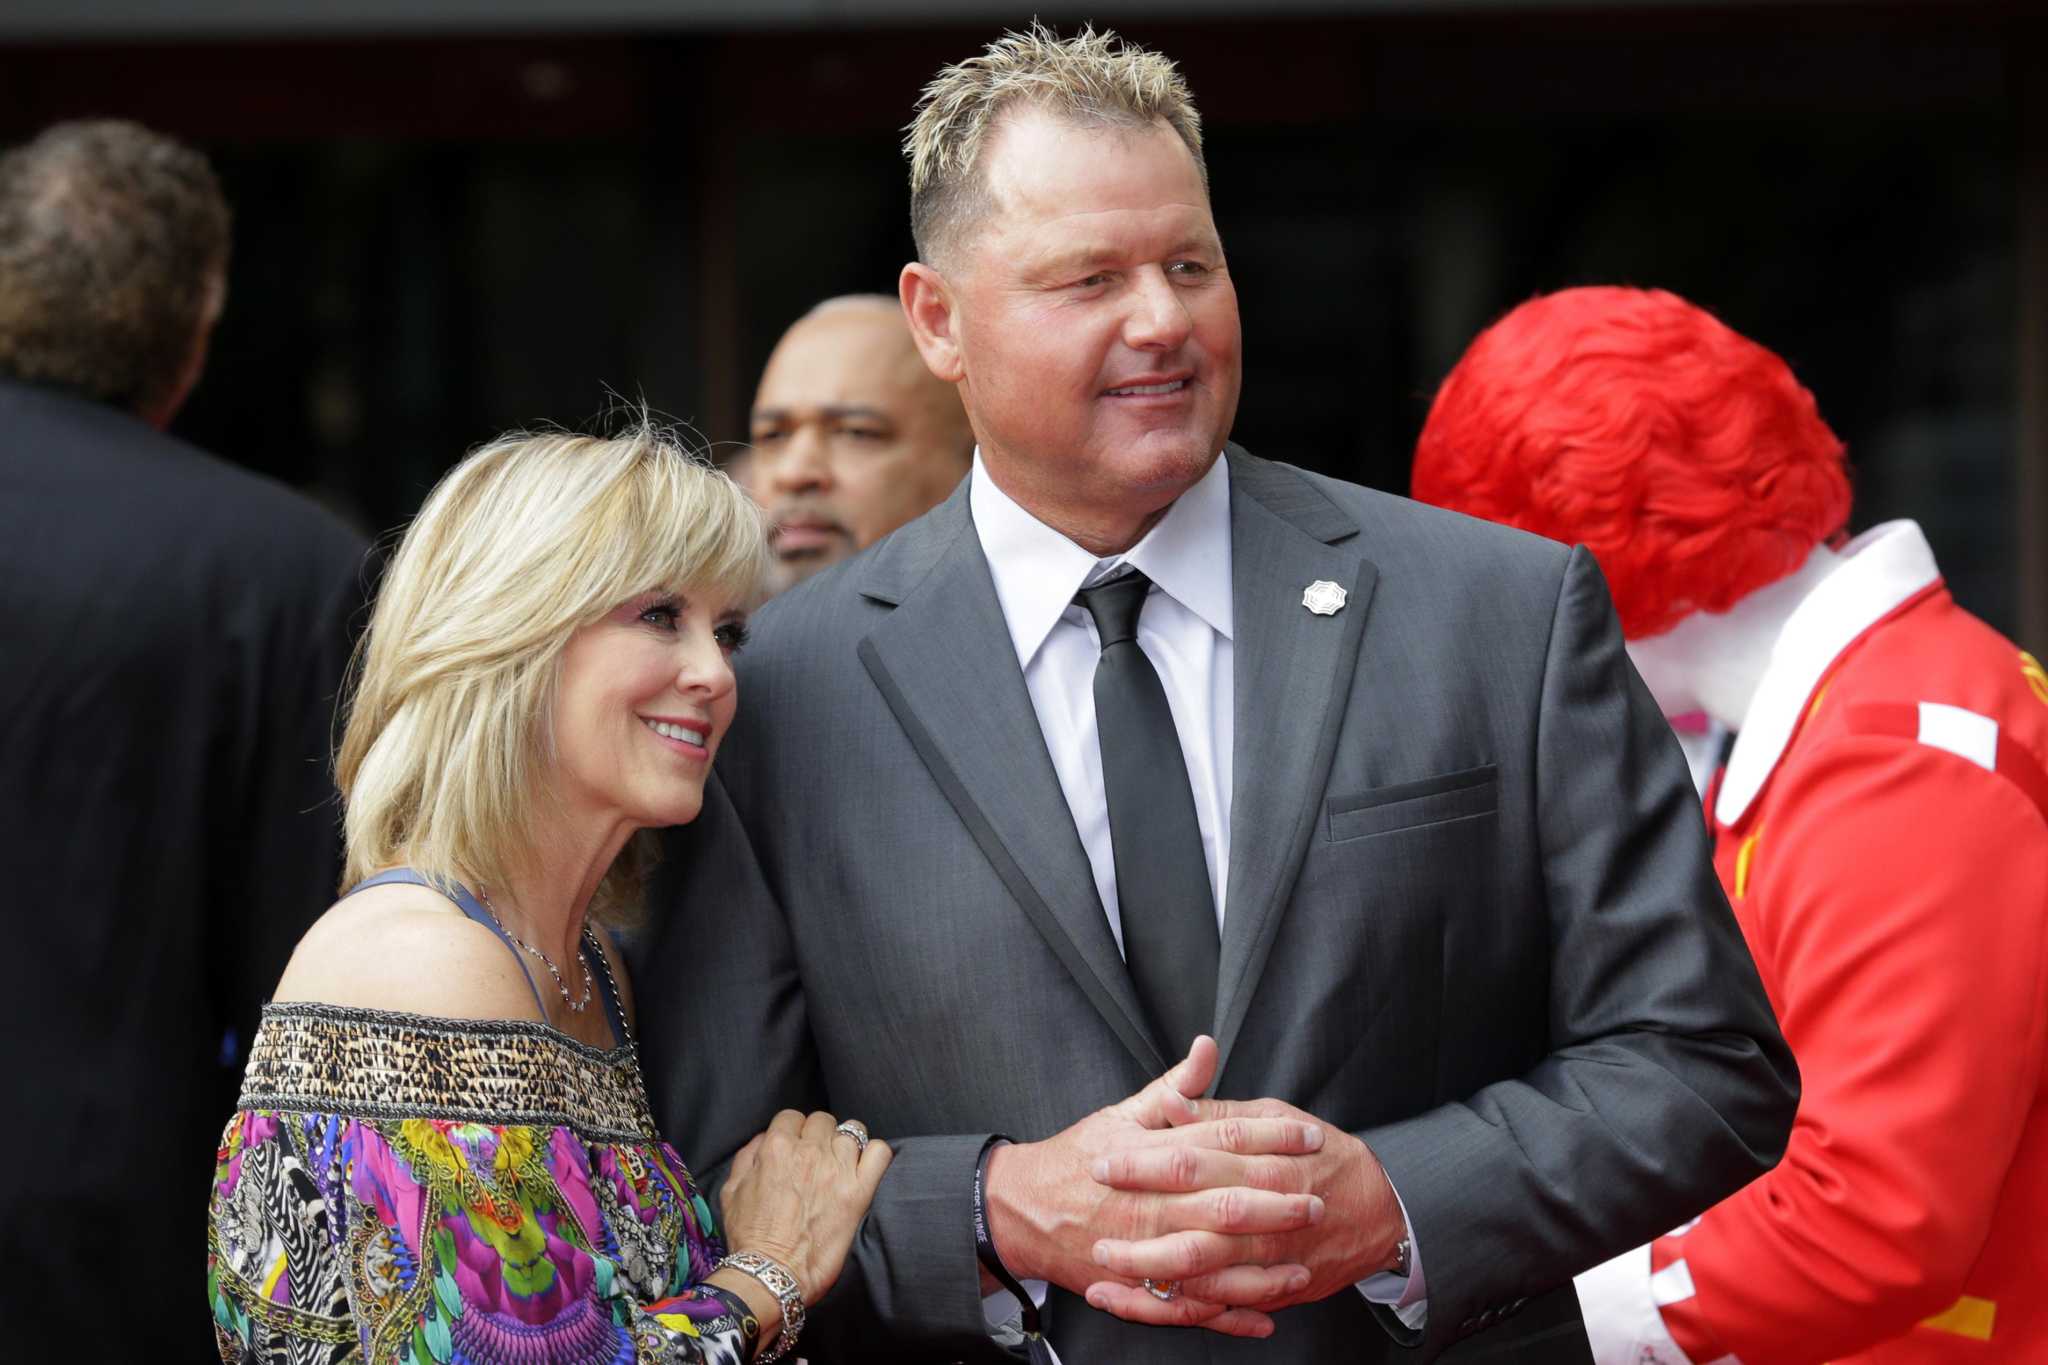 Roger Clemens gets Hall of Fame vote from Sheryl Swoopes, Clyde